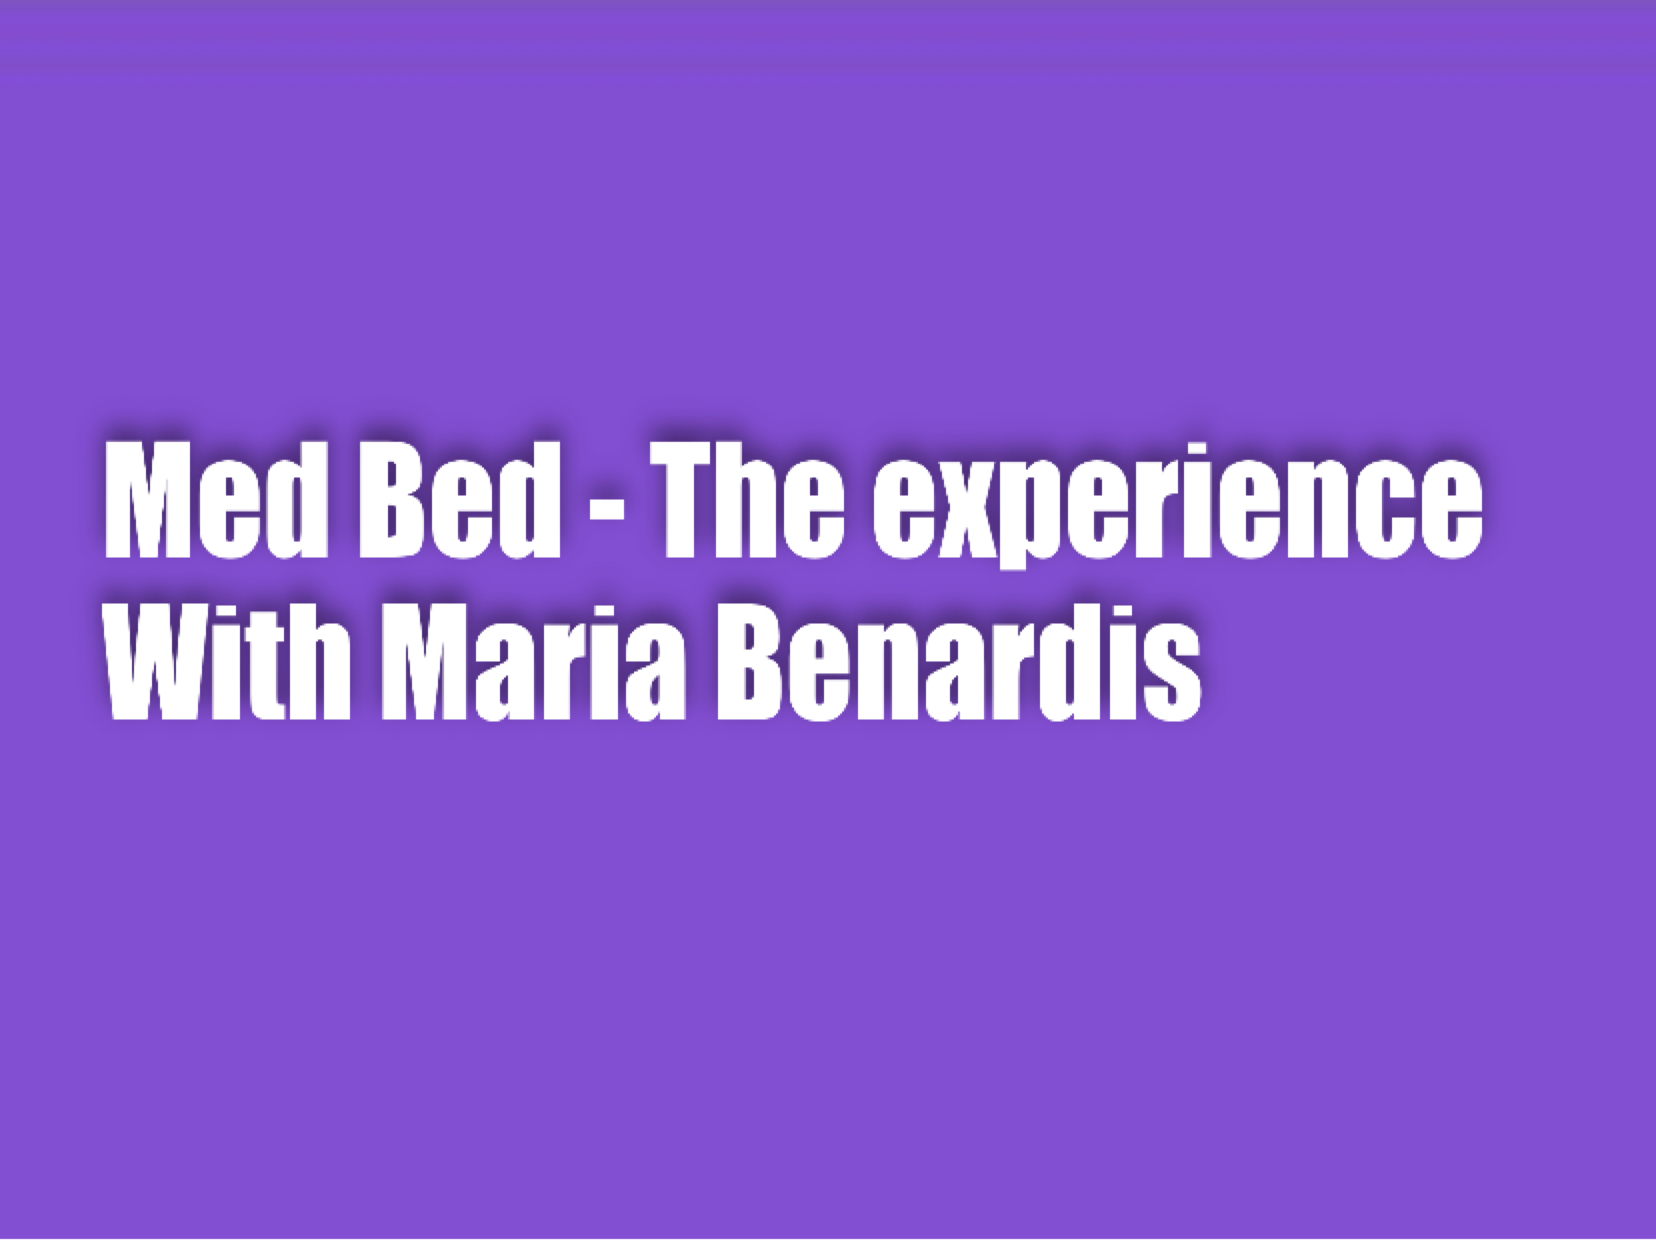 Med Bed The experience! Greekalicious